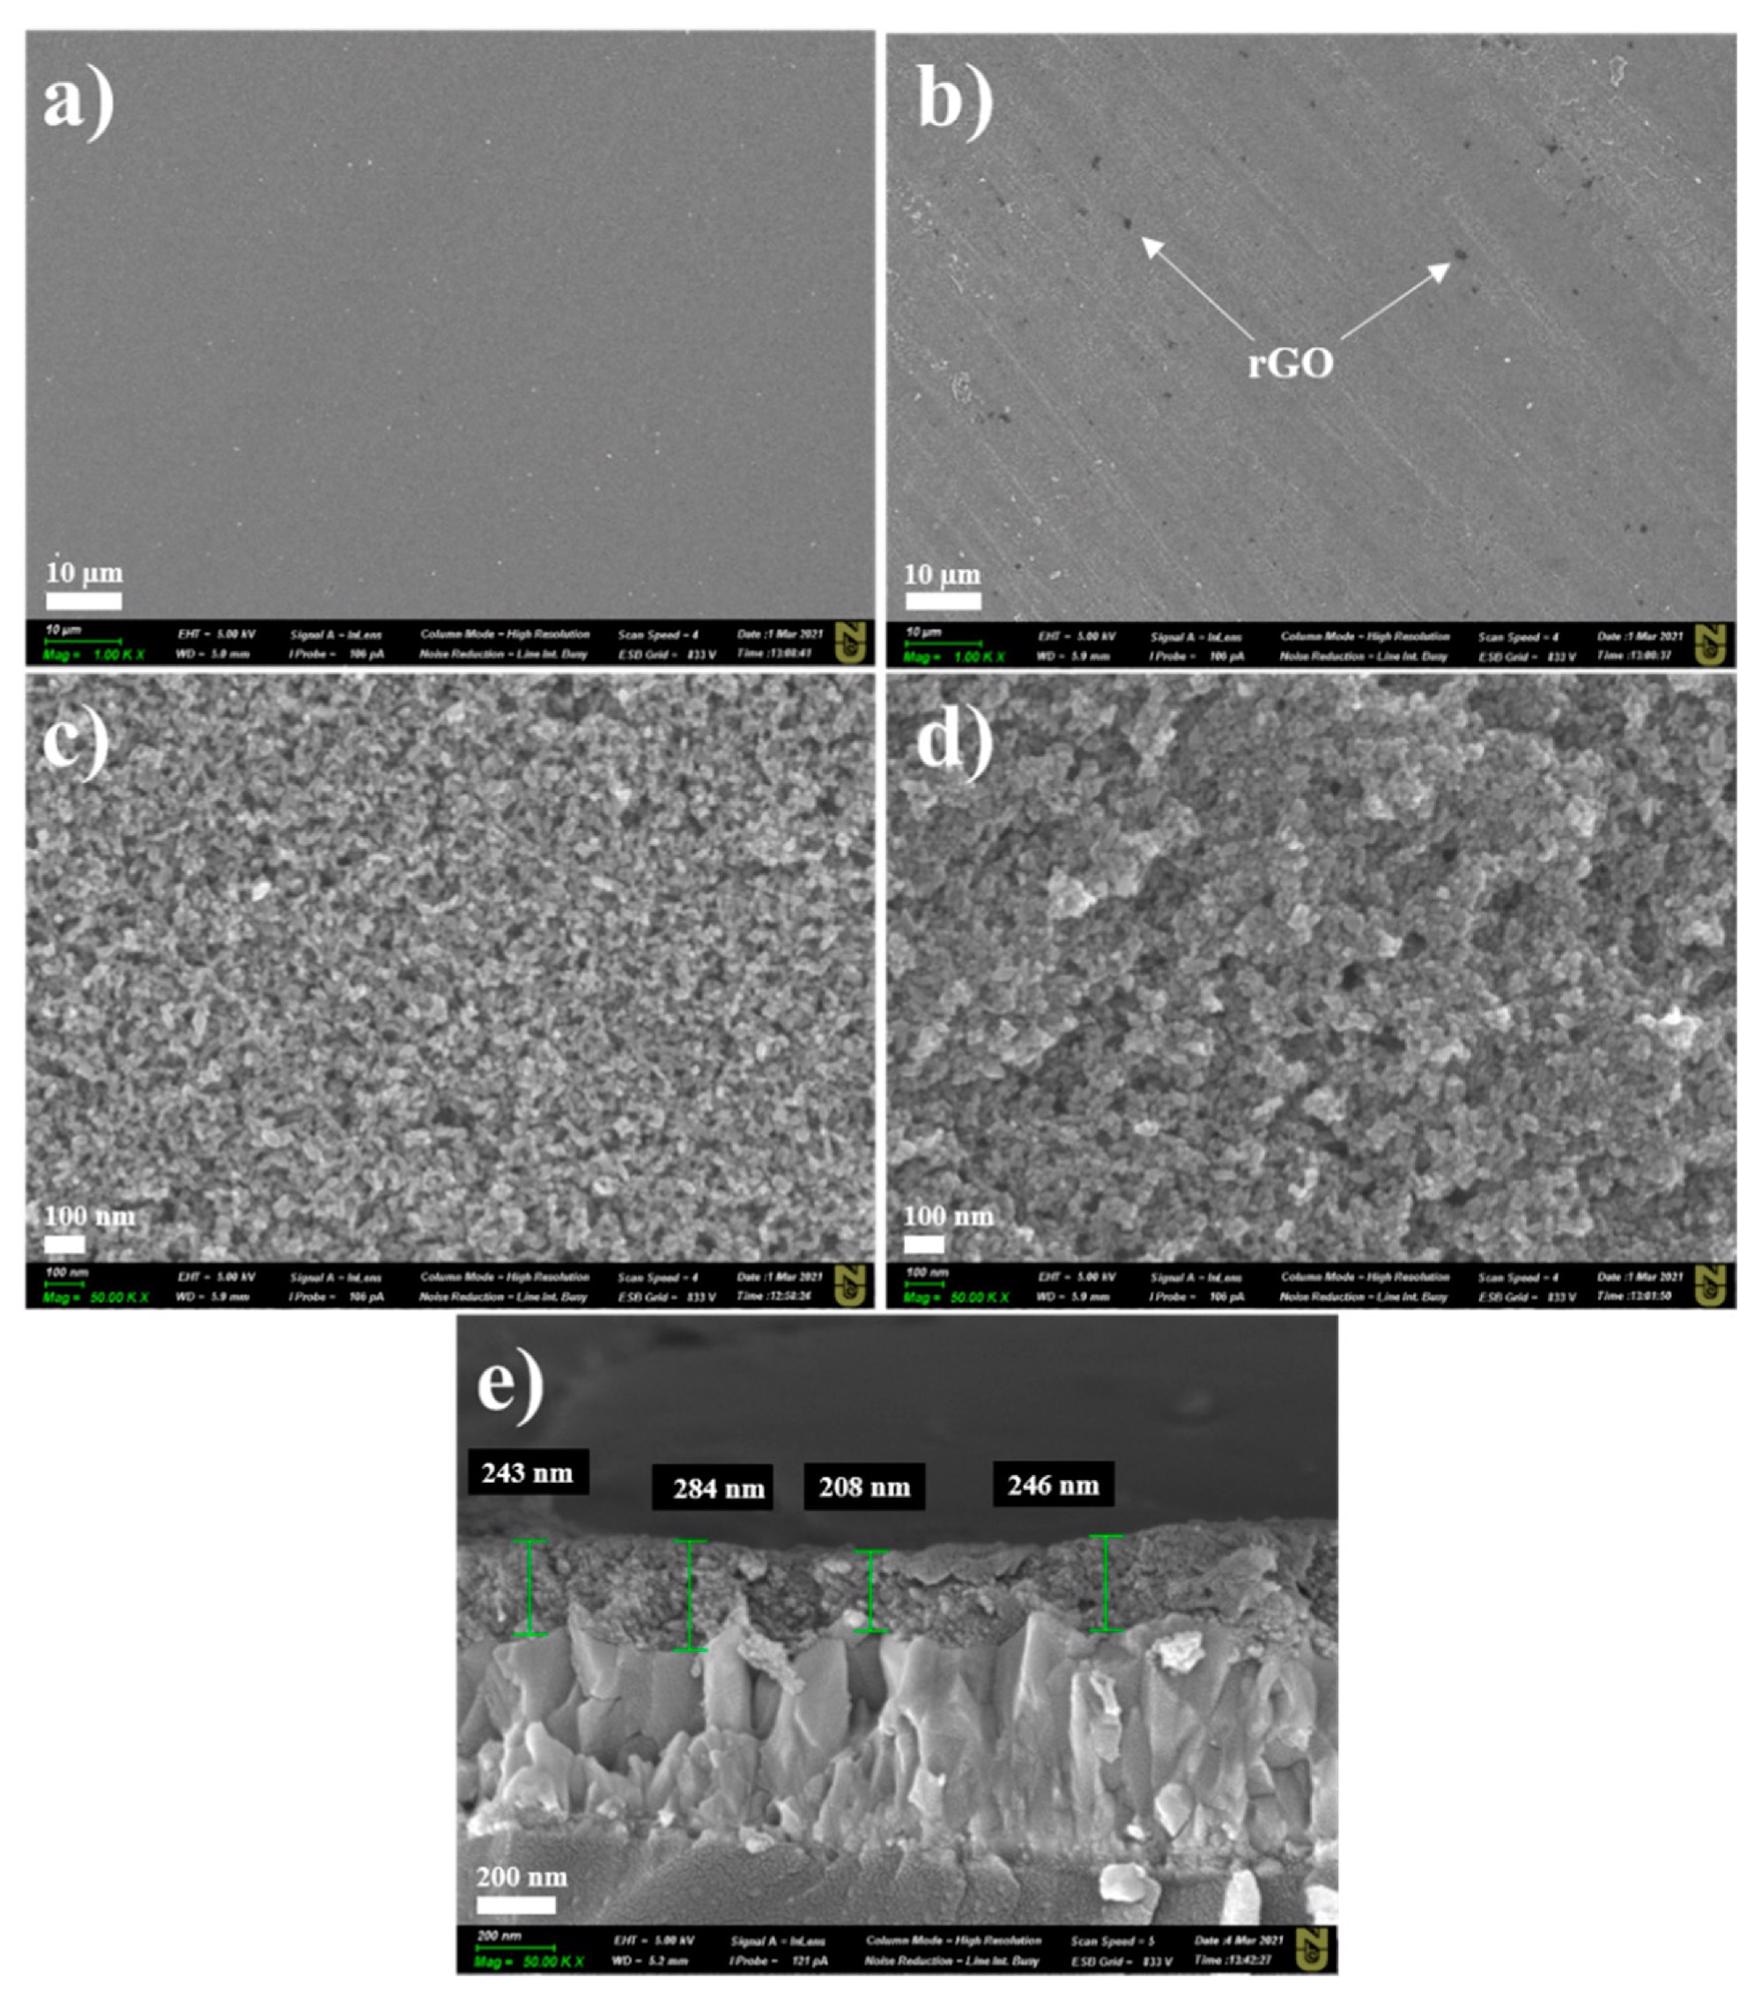 Low-resolution SEM images of (a) TiO2 film and (b) TiO2–rGO film (scale bar—10 µm). High-resolution SEM images of (c) TiO2 film and (d) TiO2–rGO film (scale bar—100 nm). Cross-sectional SEM image of (e) TiO2–rGO film (scale bar—200 nm).